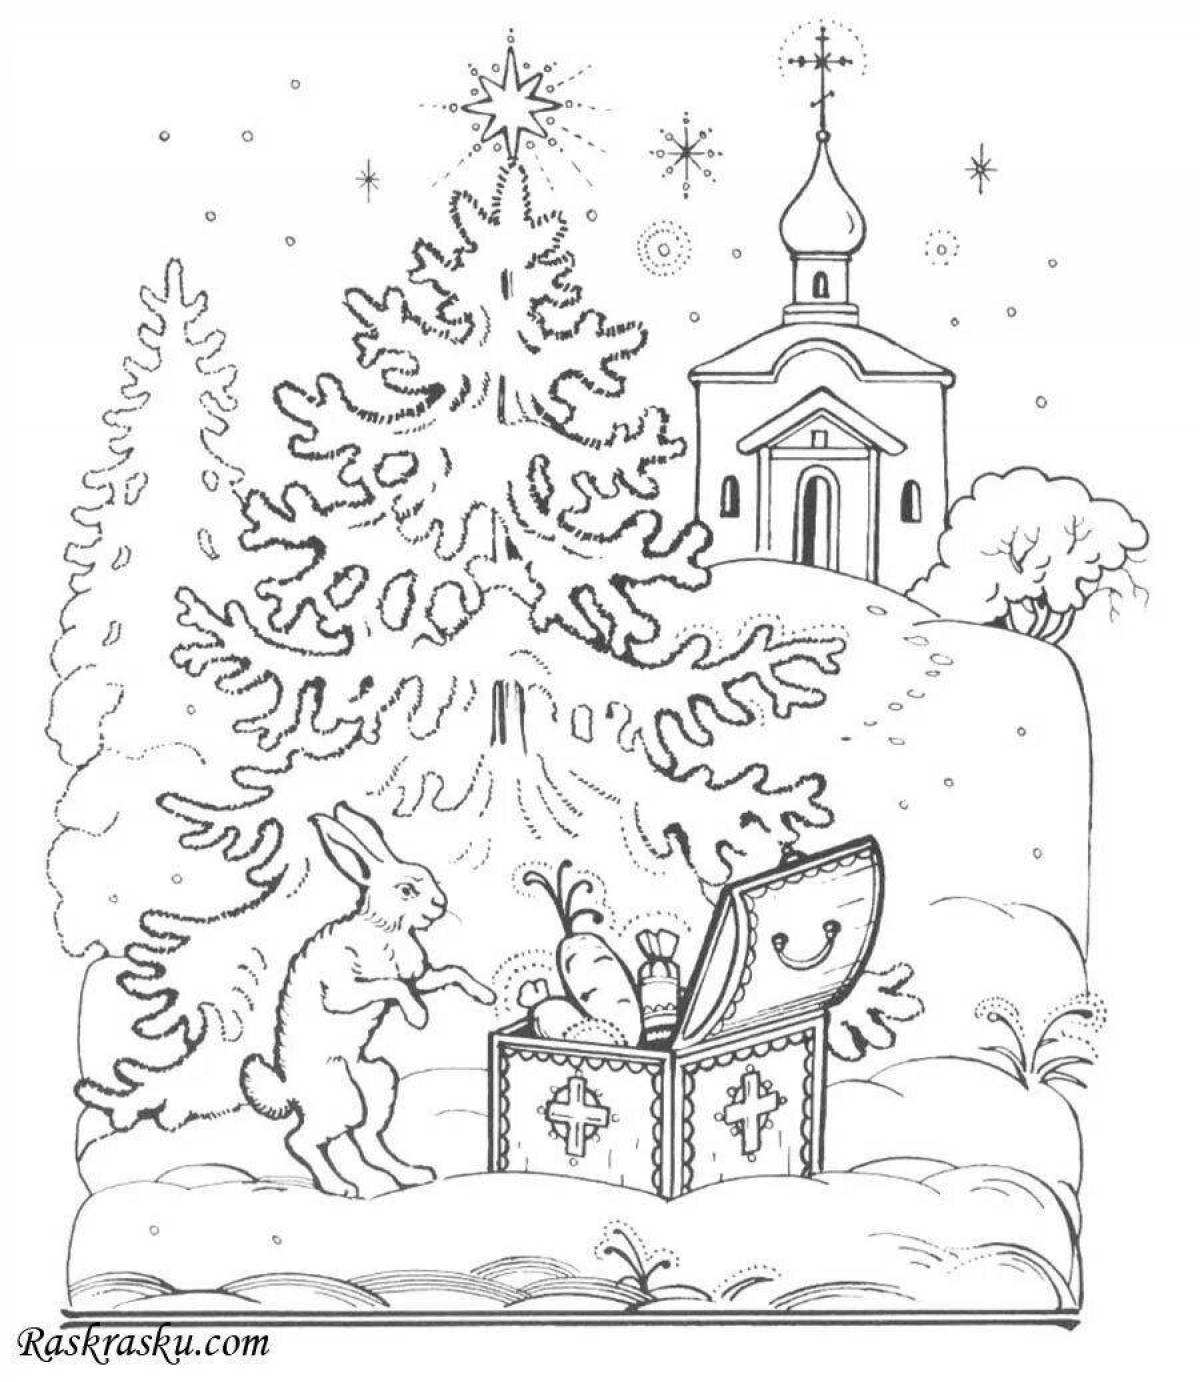 Whimsical Christmas coloring book for 3-4 year olds